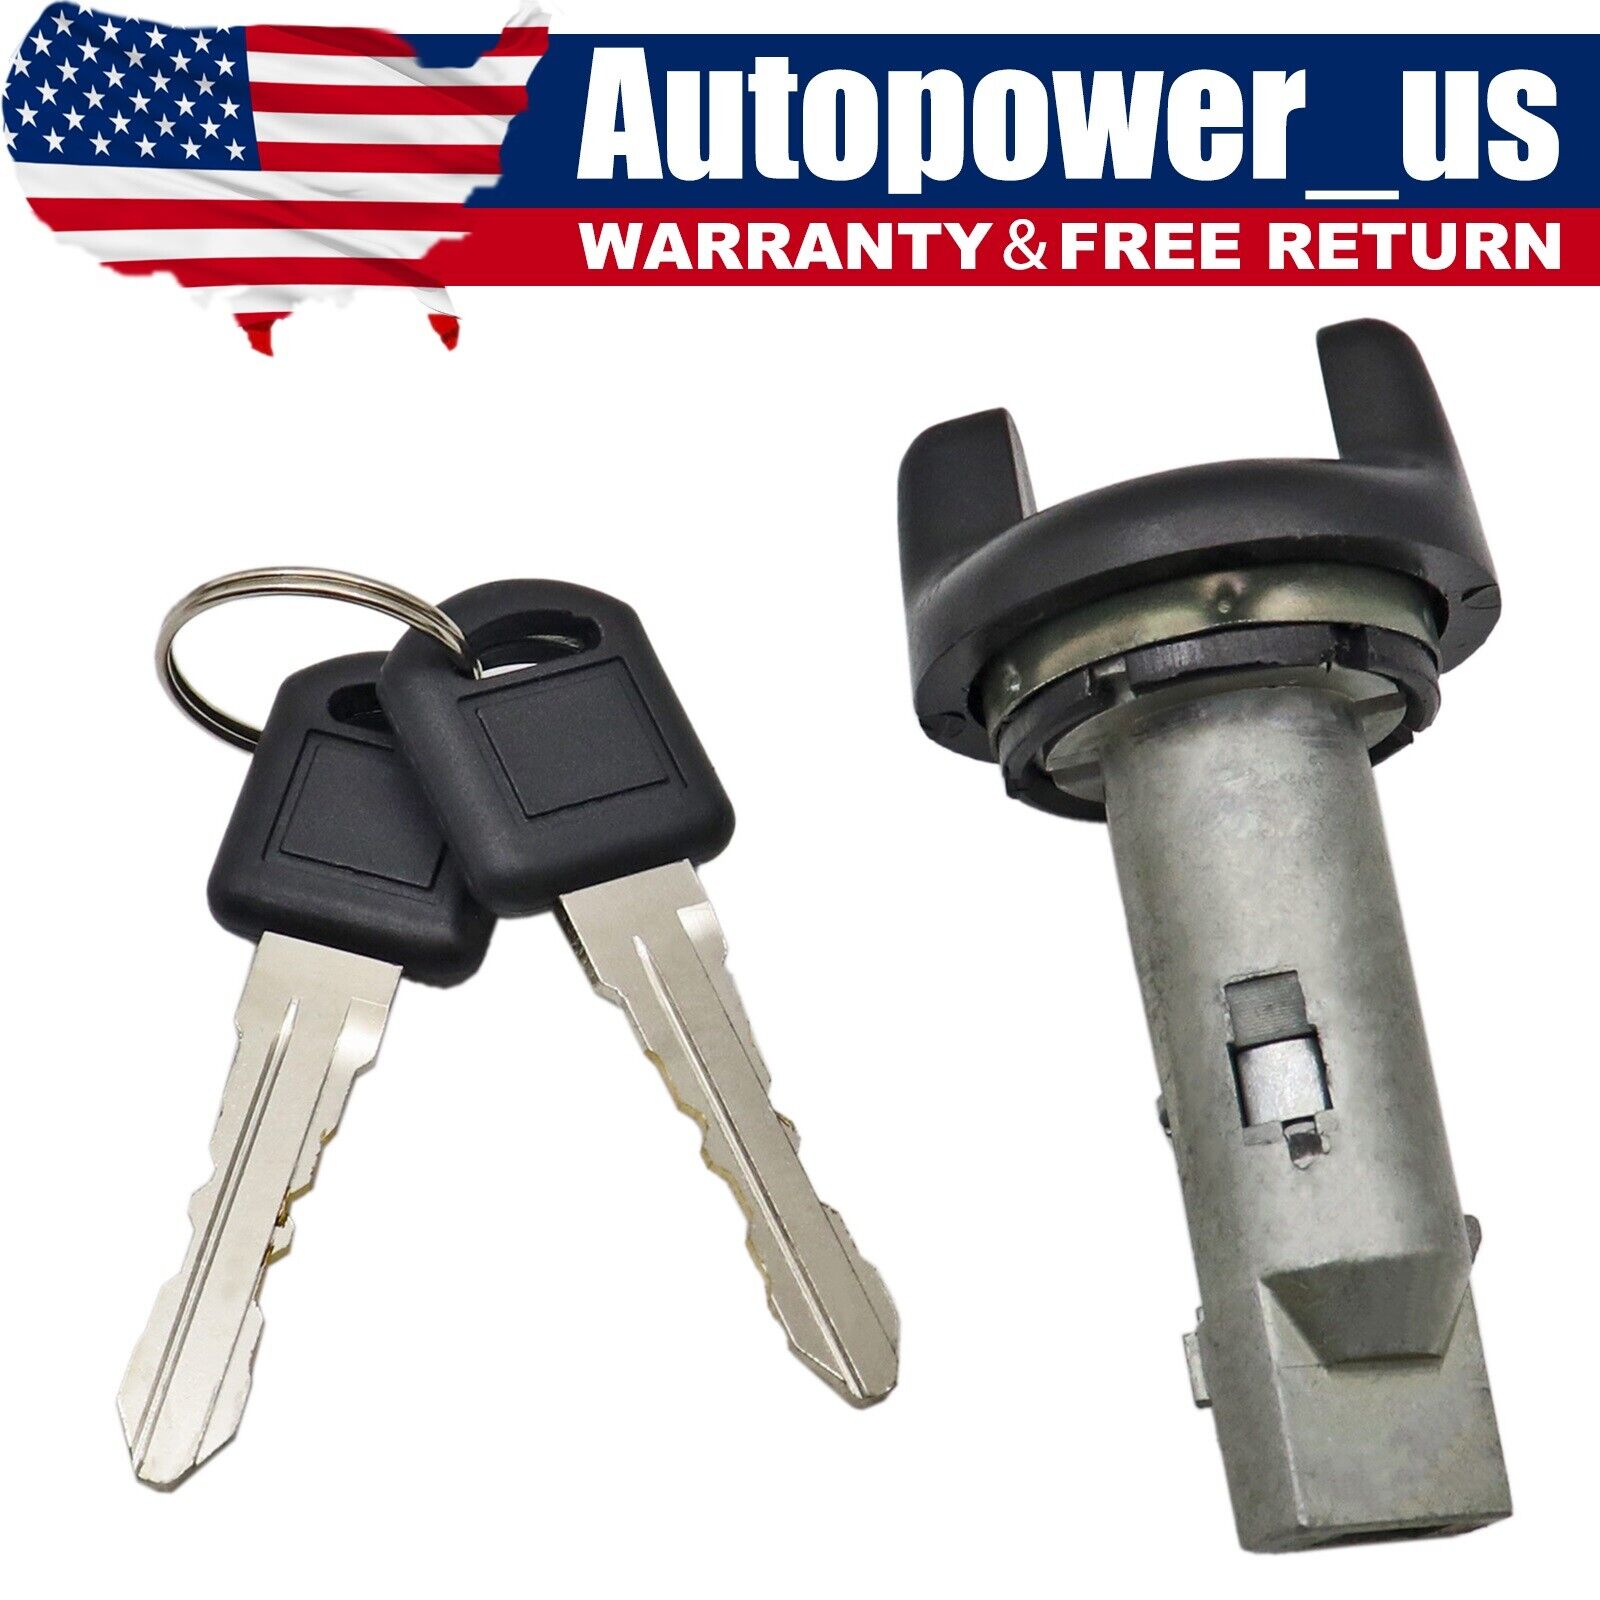 NEW IGNITION KEY SWITCH LOCK CYLINDER FOR CHEVY GMC C K PICKUP 95 96 97